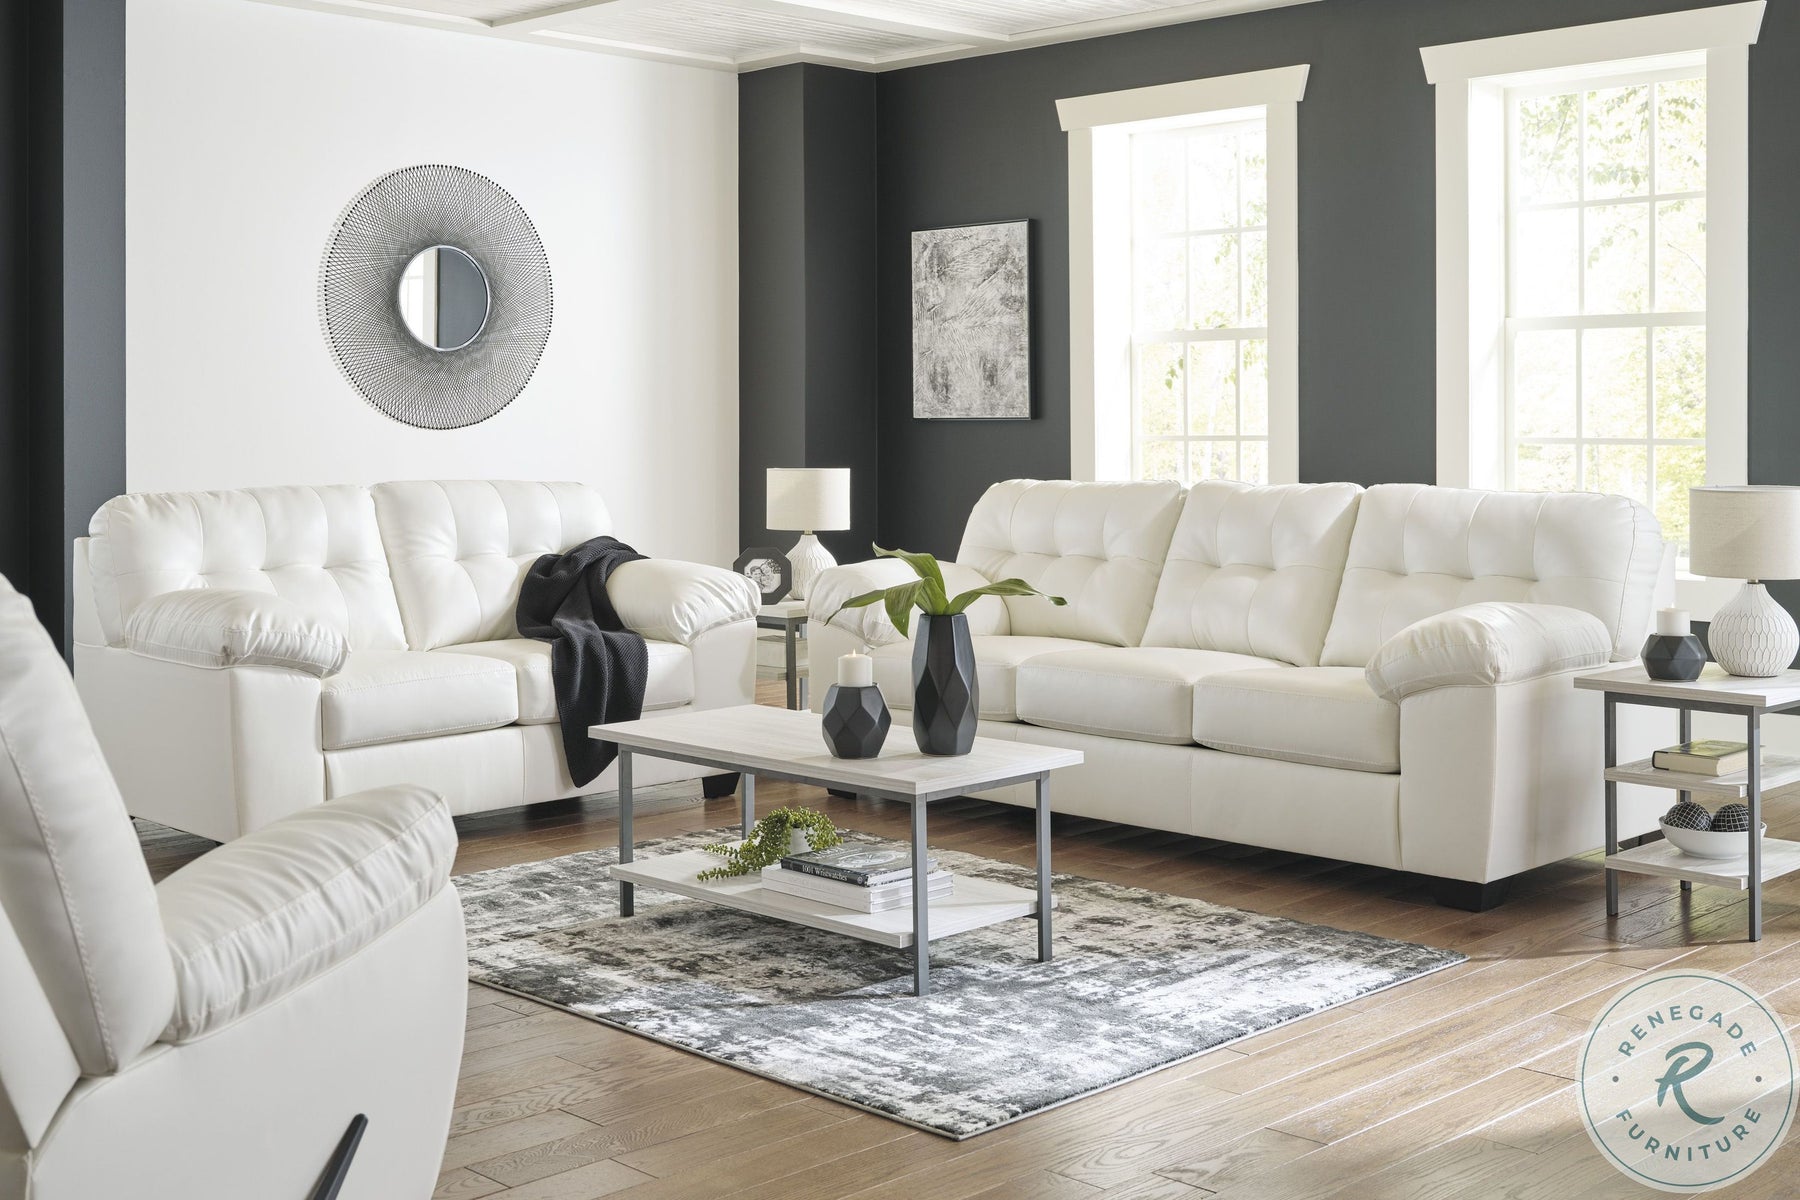 Living Spaces Locations in Las Vegas, Nevada. Locate the closest Living Spaces store near you to find deals on living room, dining room, bedroom, 